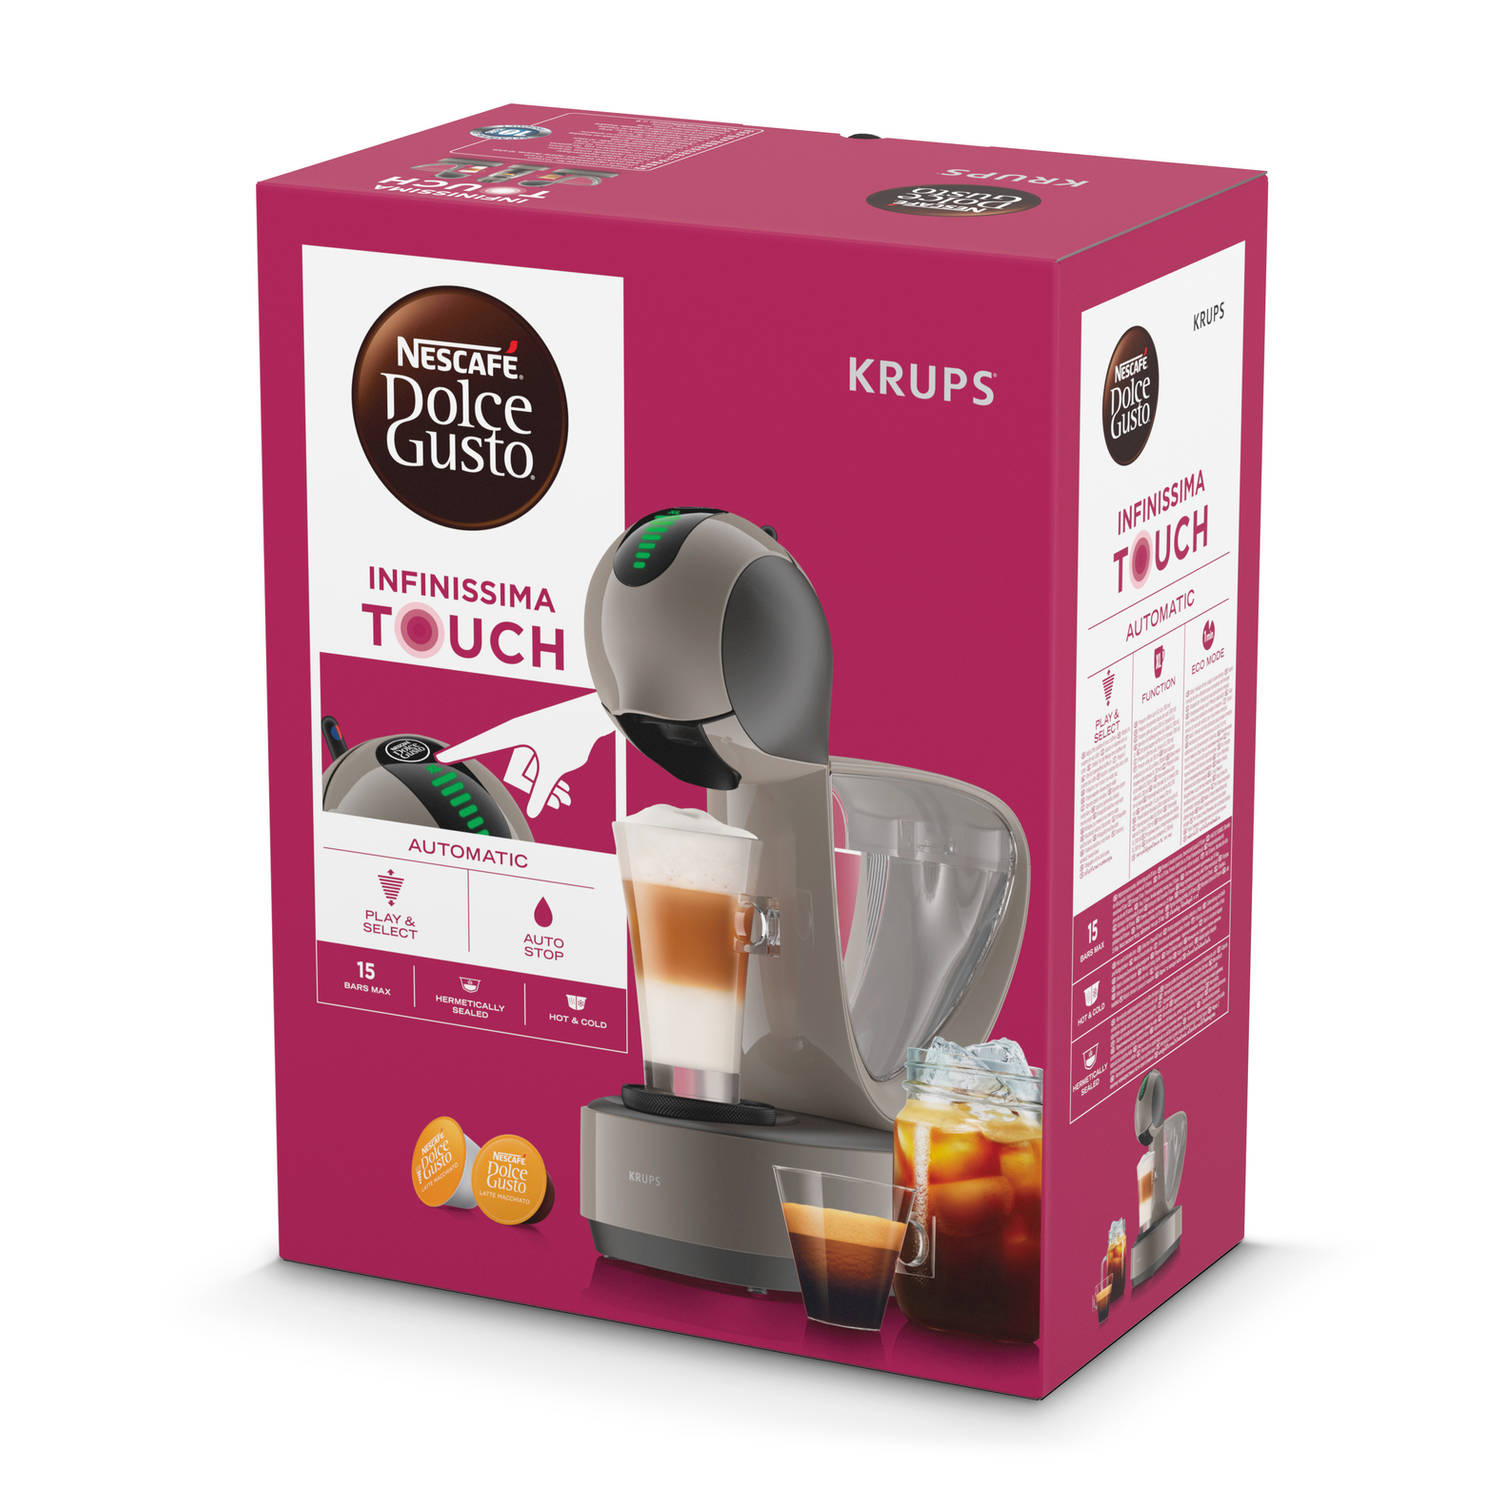 KP270A Gusto | Taupe Blokker Dolce koffiemachine NESCAFÉ Krups - Automatische Infinissima Touch